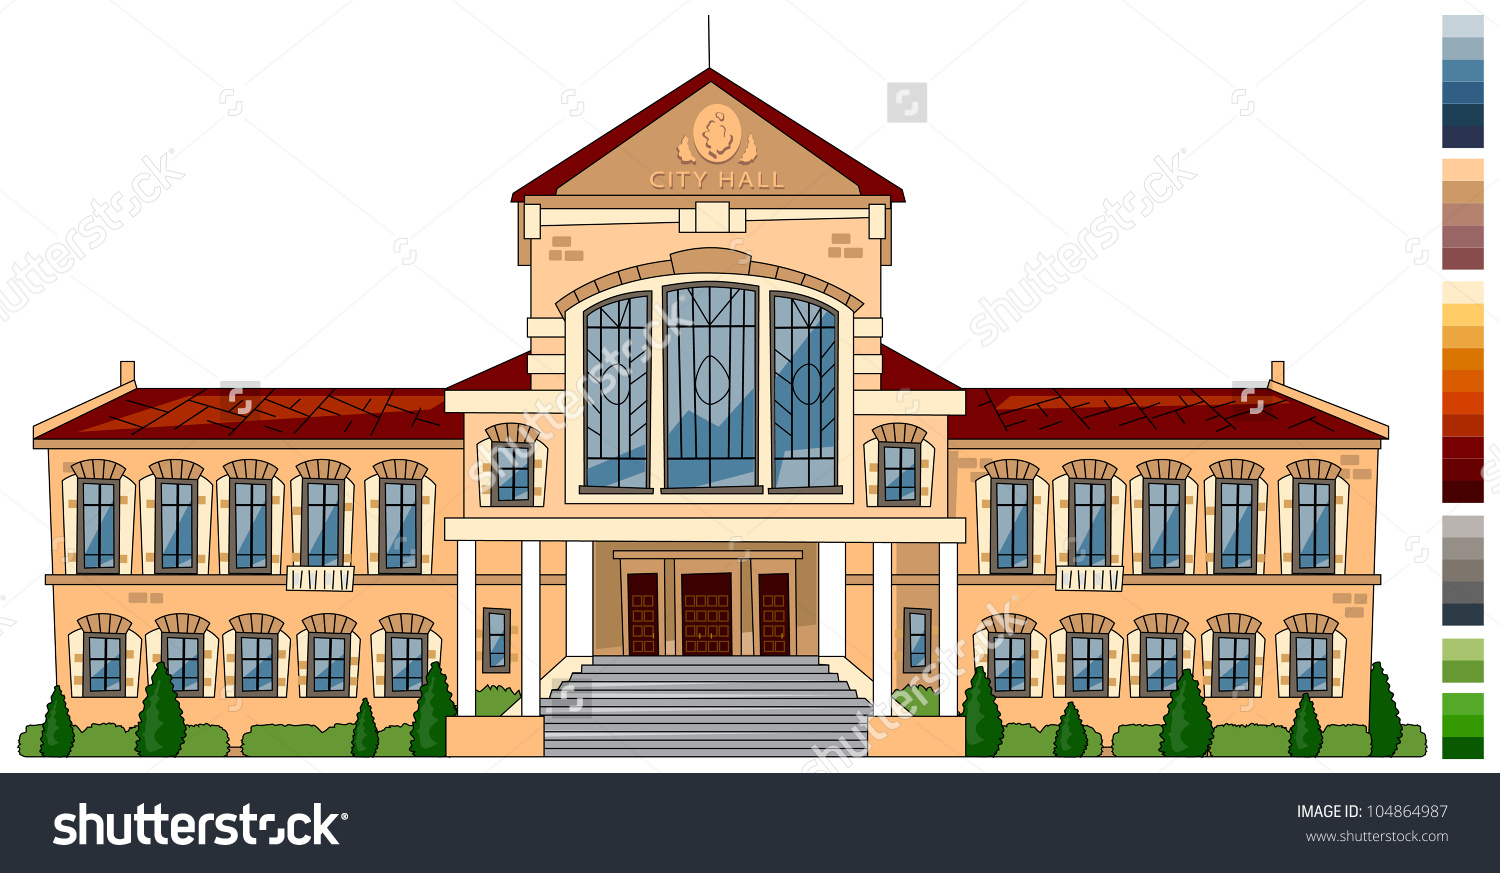 Municipal building clipart - Clipground